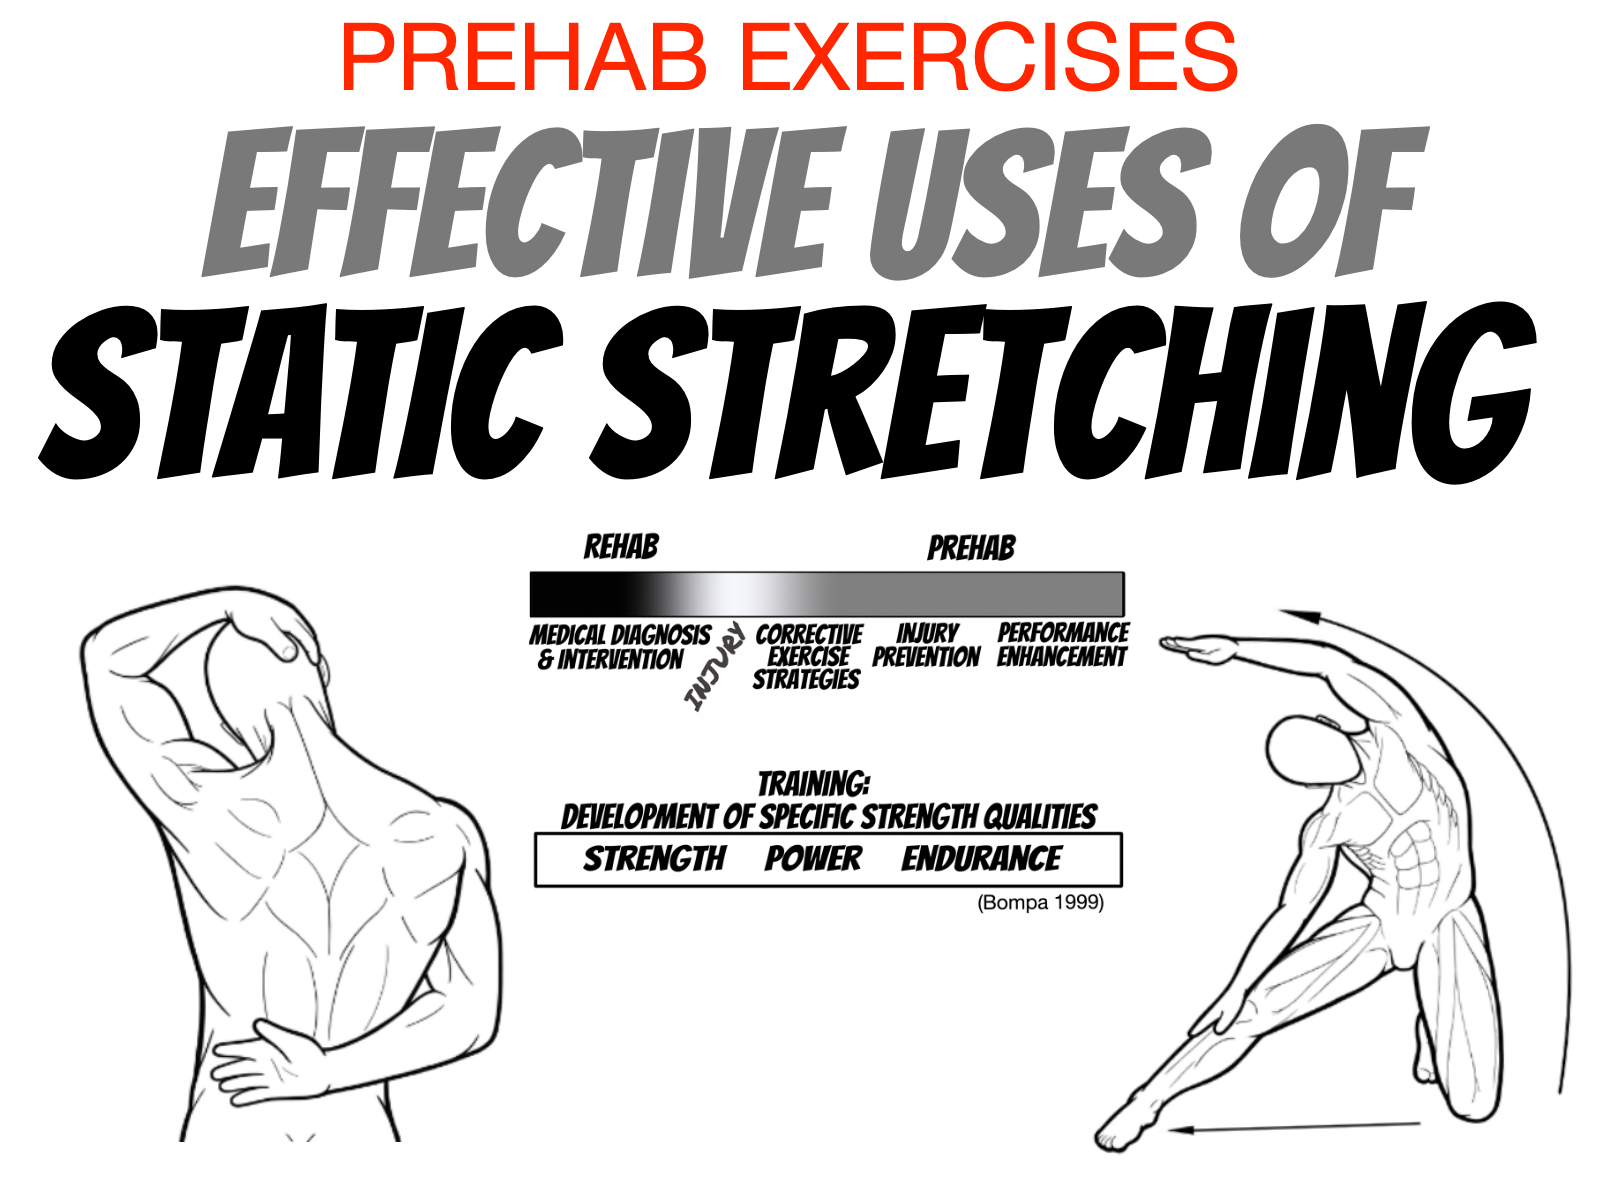 Narrative Review: Uses for Static Stretching in Rehab, Prehab and